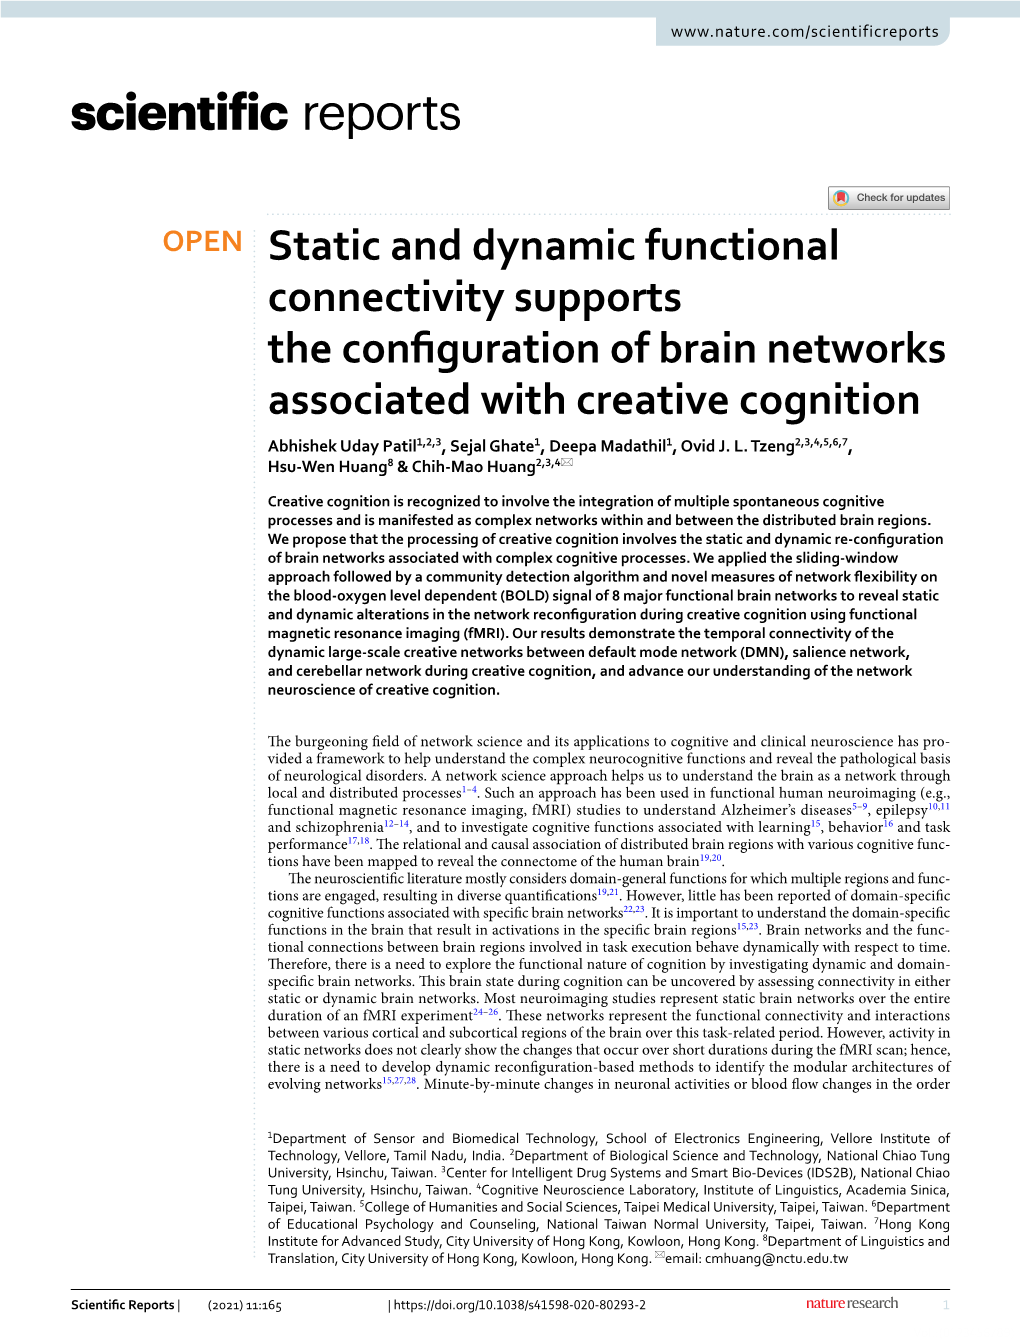 Static and Dynamic Functional Connectivity Supports The